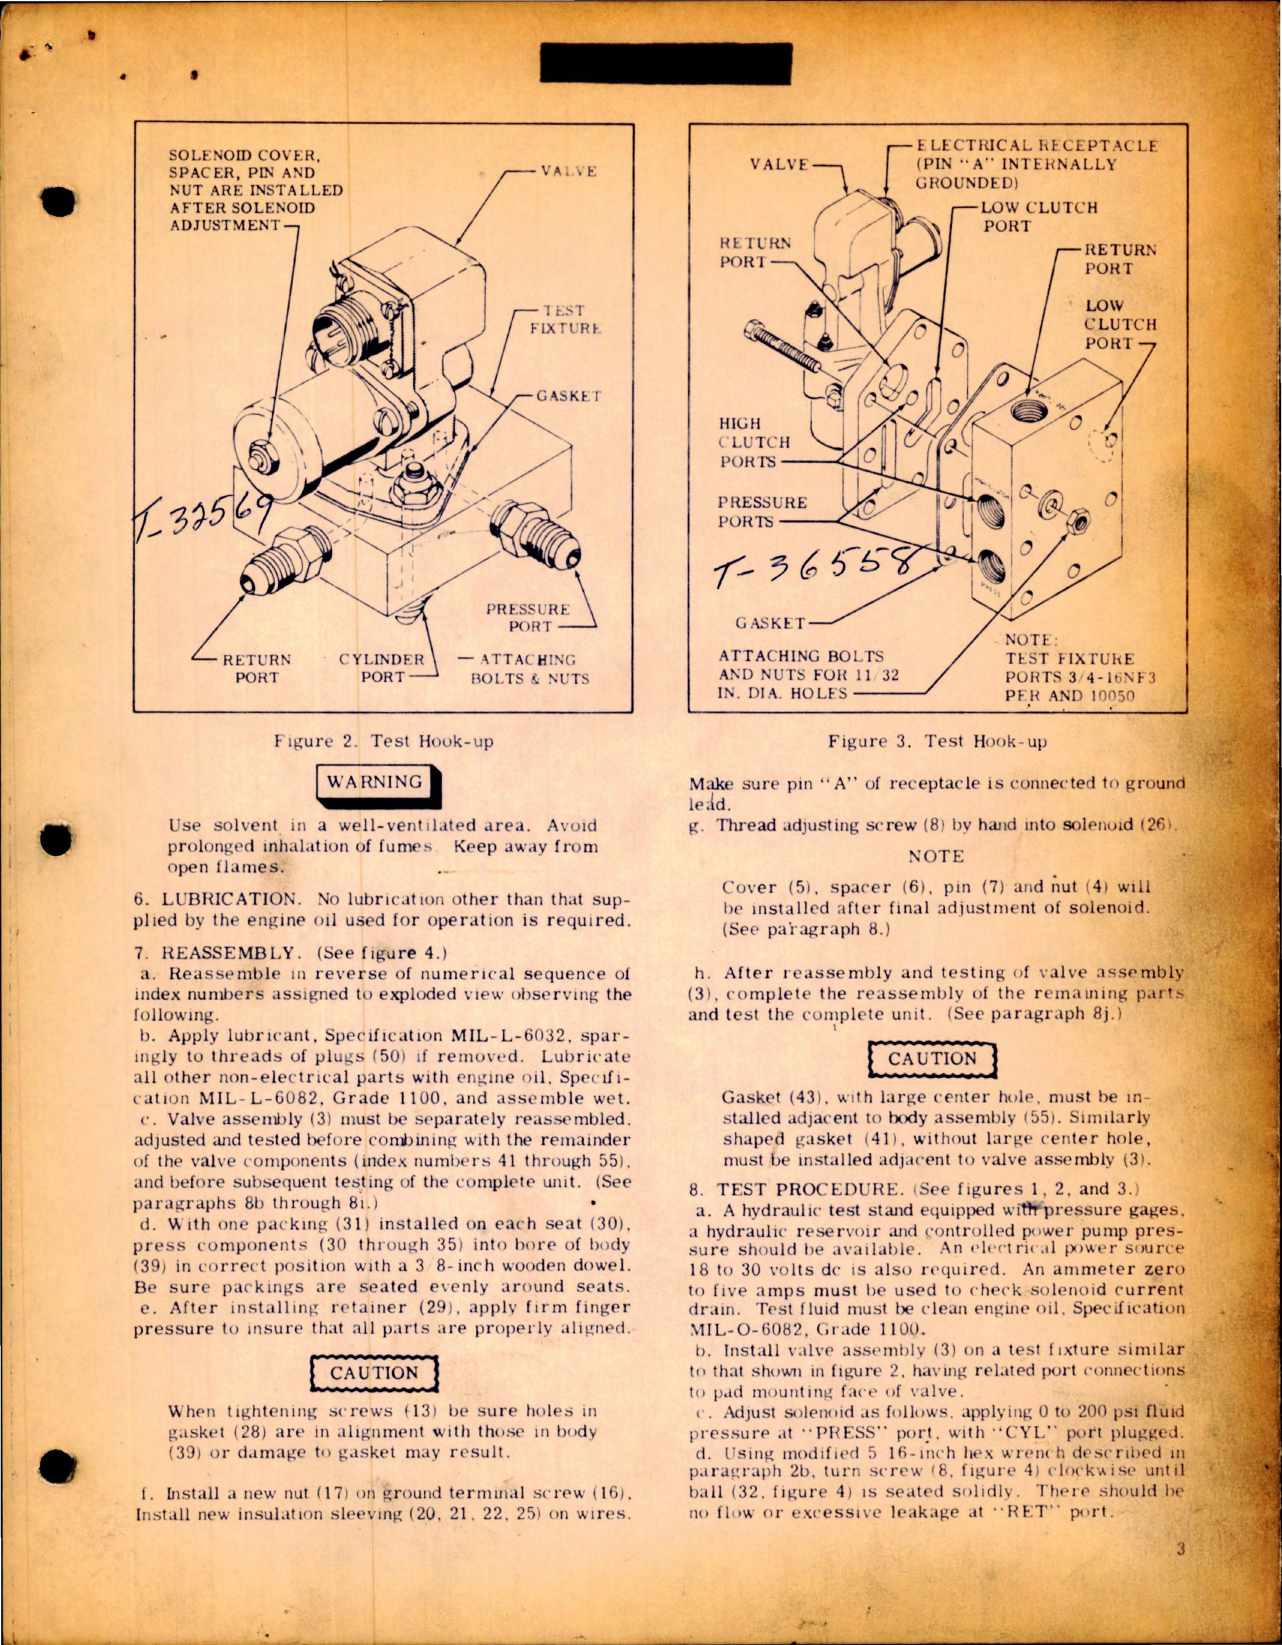 Sample page 5 from AirCorps Library document: Overhaul Instructions with Parts for Engine Blower Clutch Selector Valve - Part 29573